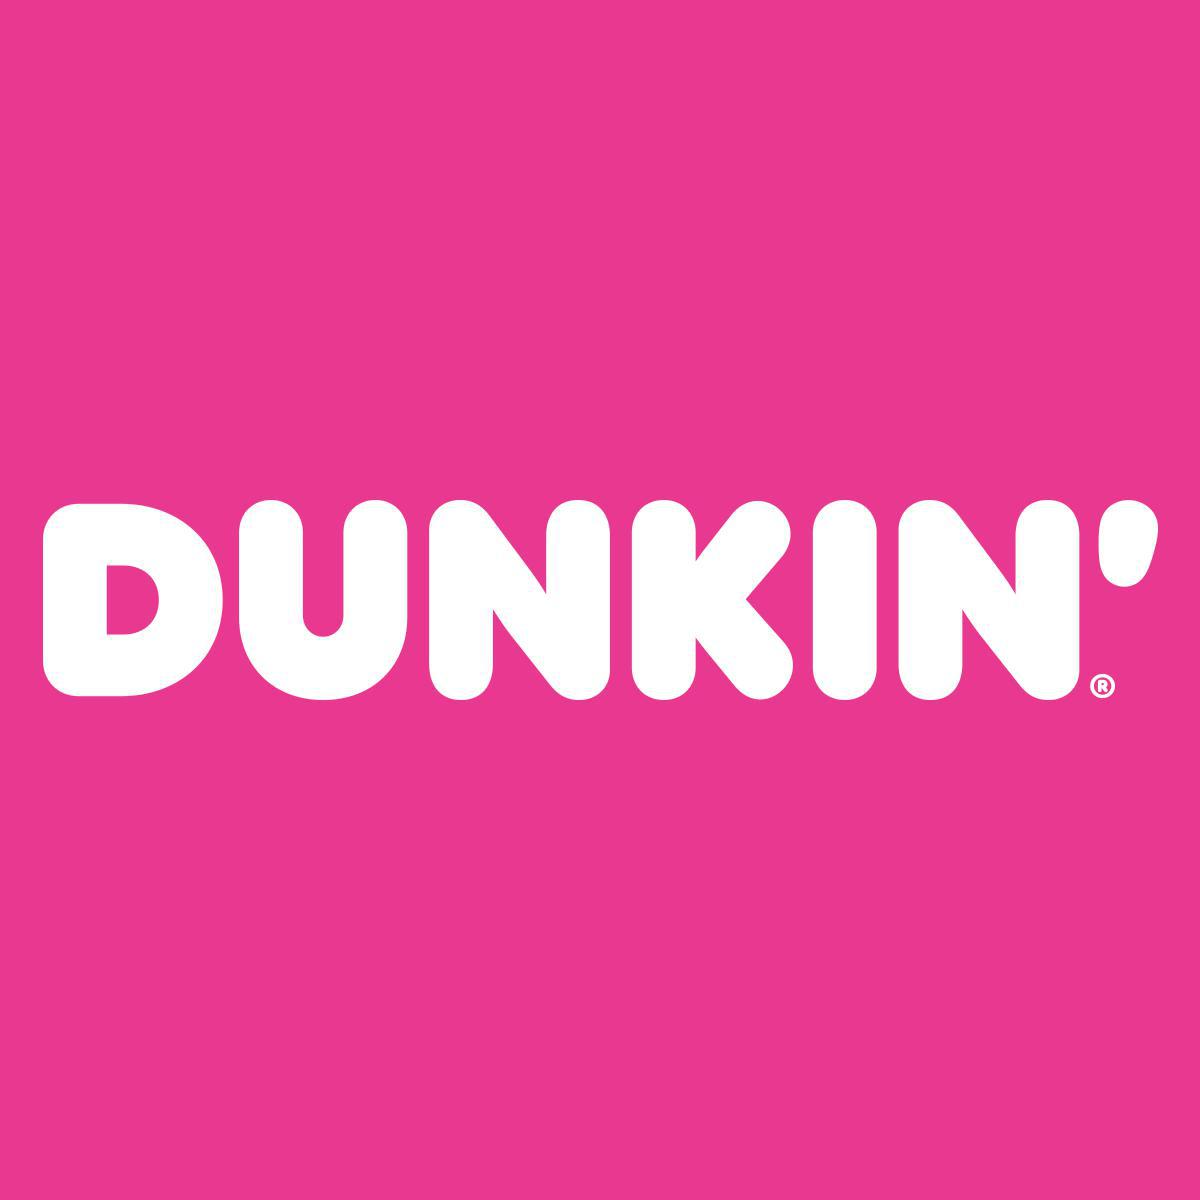 Dunkin' -  5889 Forbes Ave, Pittsburgh Pittsburgh